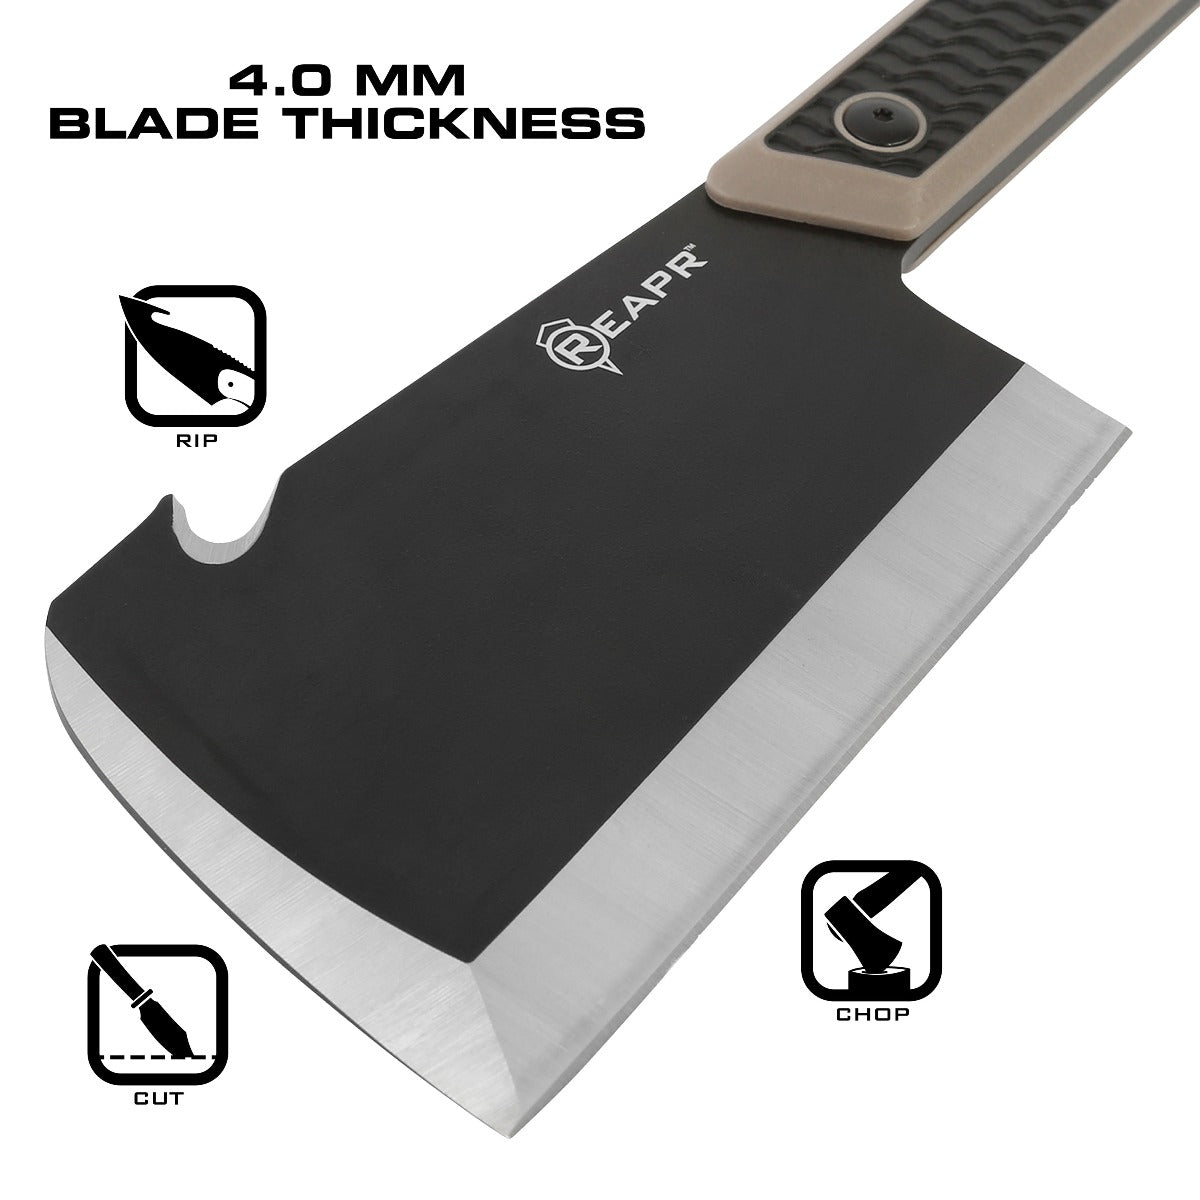 Look no further for the most versatile in fixed blade knives. The Reapr Versa CLEAVR cleaver knife perfect for almost any use. Take it on the trail and use it as a mini axe or machete to help clear brush. Take it camping to help whittle wood for the fire or rip rope. www.defenceqstore.com.au